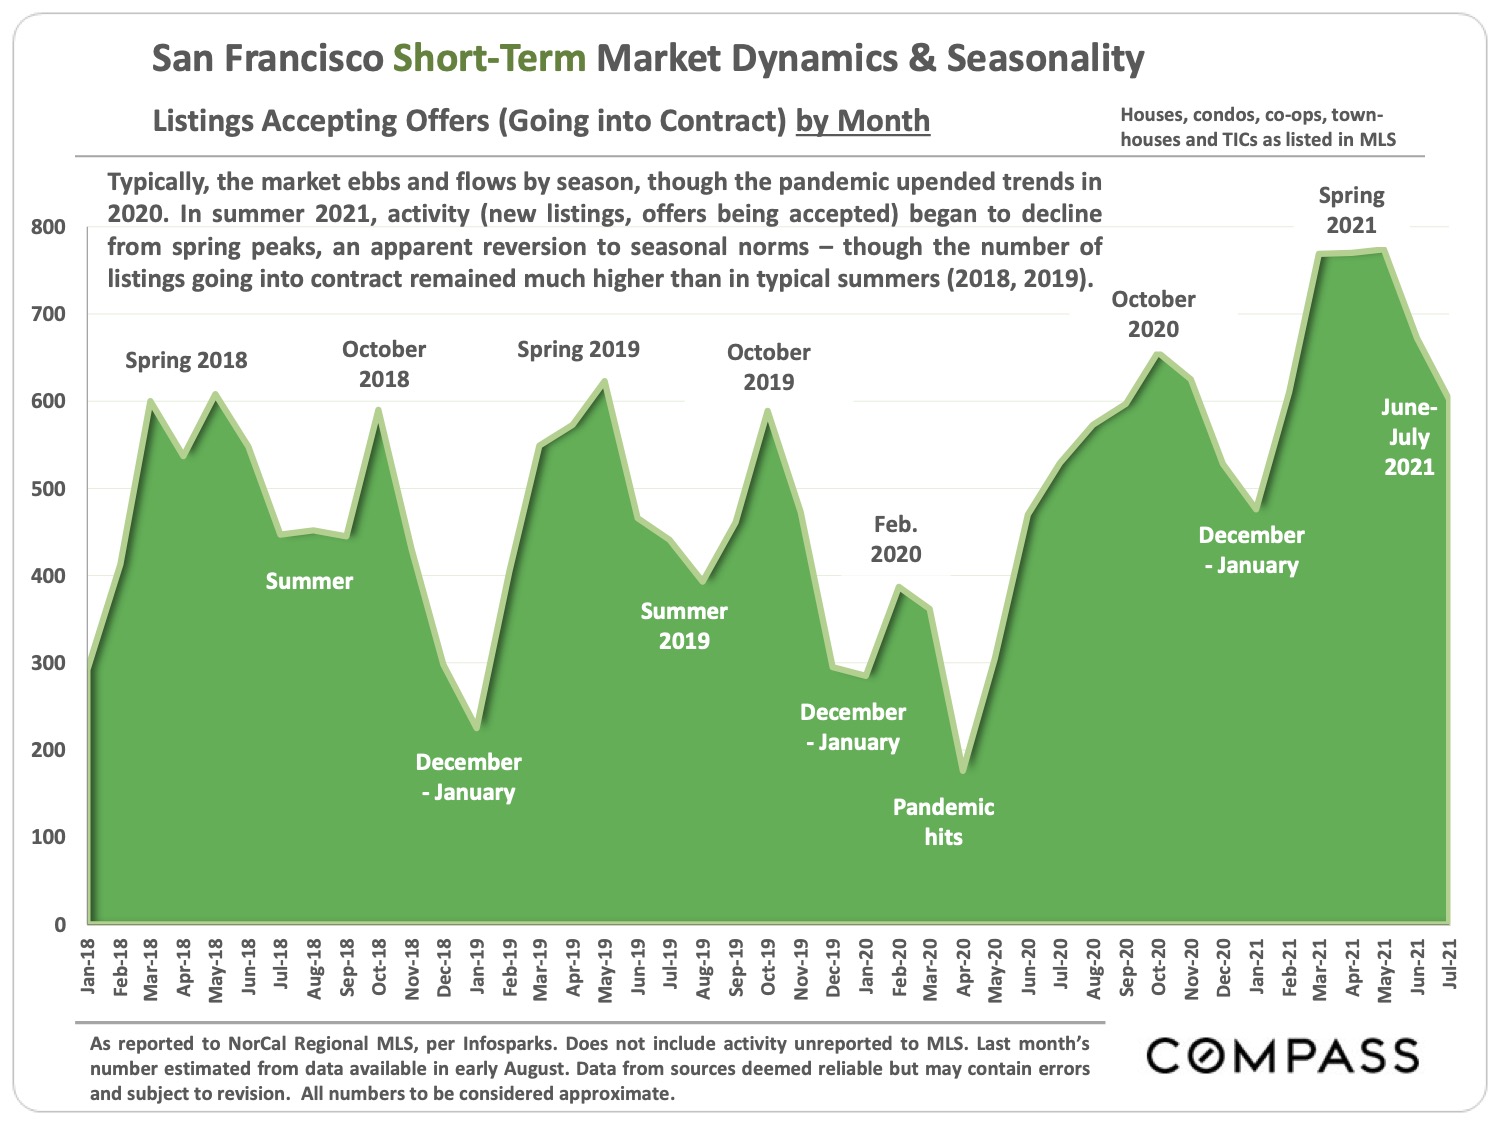 Image of San Francisco Short Term Market Dynamics & Seasonality Listings Accepting Offers Going into Contract by Month